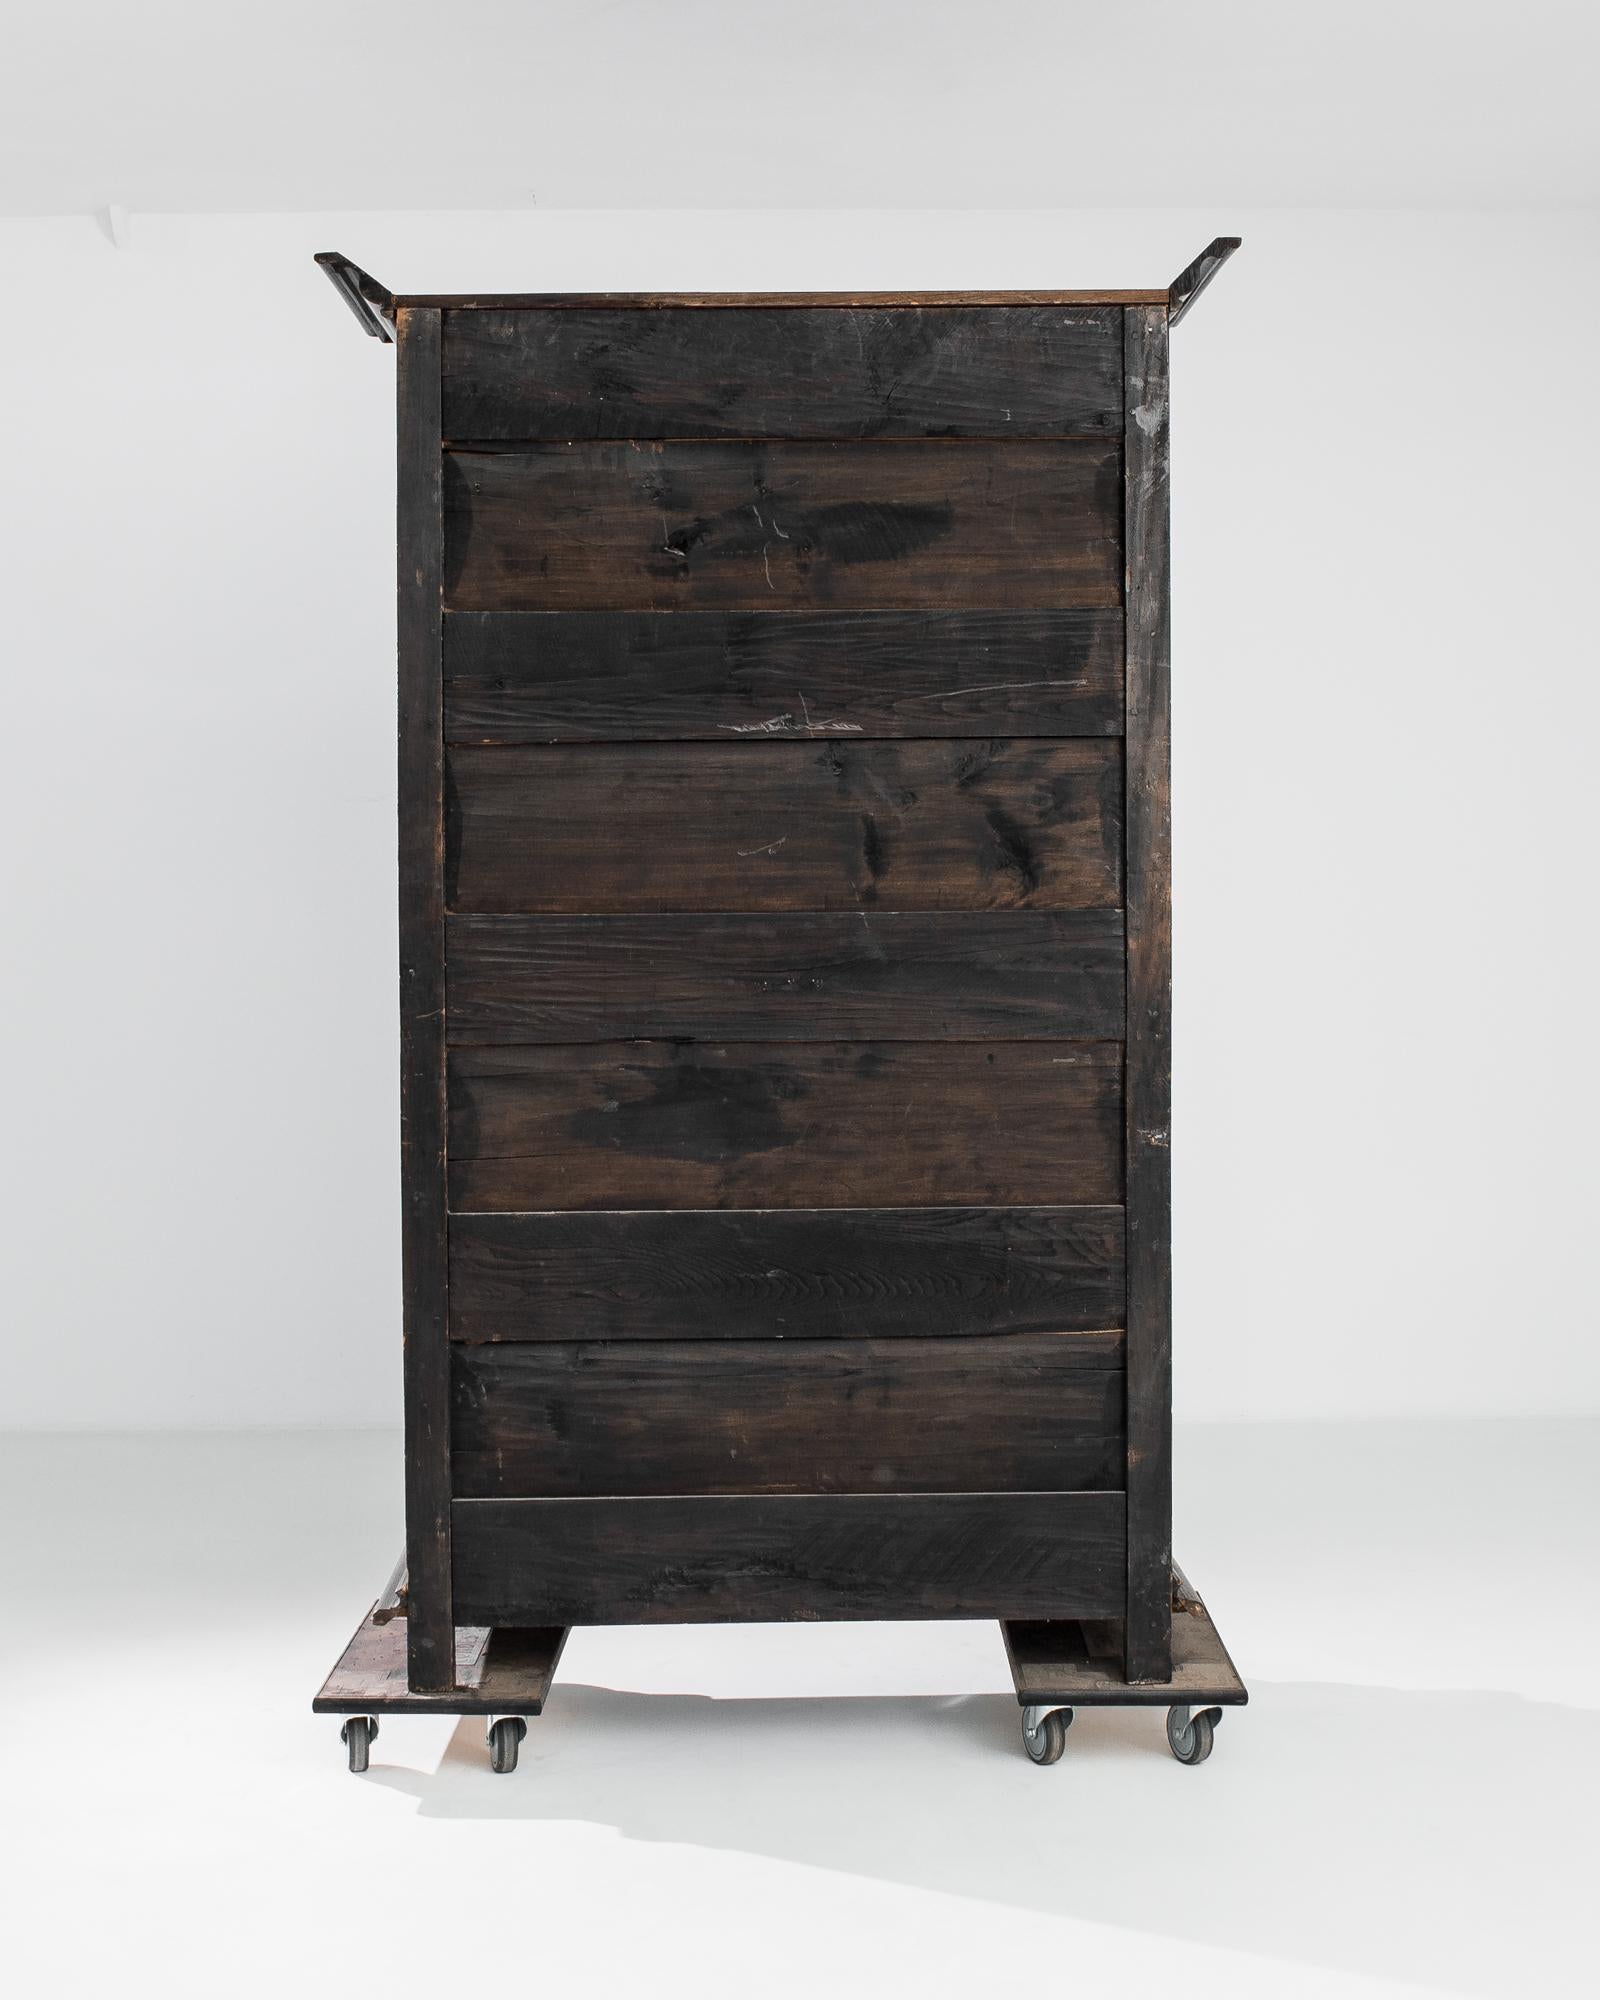 A hardwood cabinet with original patina from France, produced circa 1800. Standing over seven feet tall, this stately chest features two levels of locking, two-shelf cabinets separated by a row of two sliding drawers. The richly decorated facade is